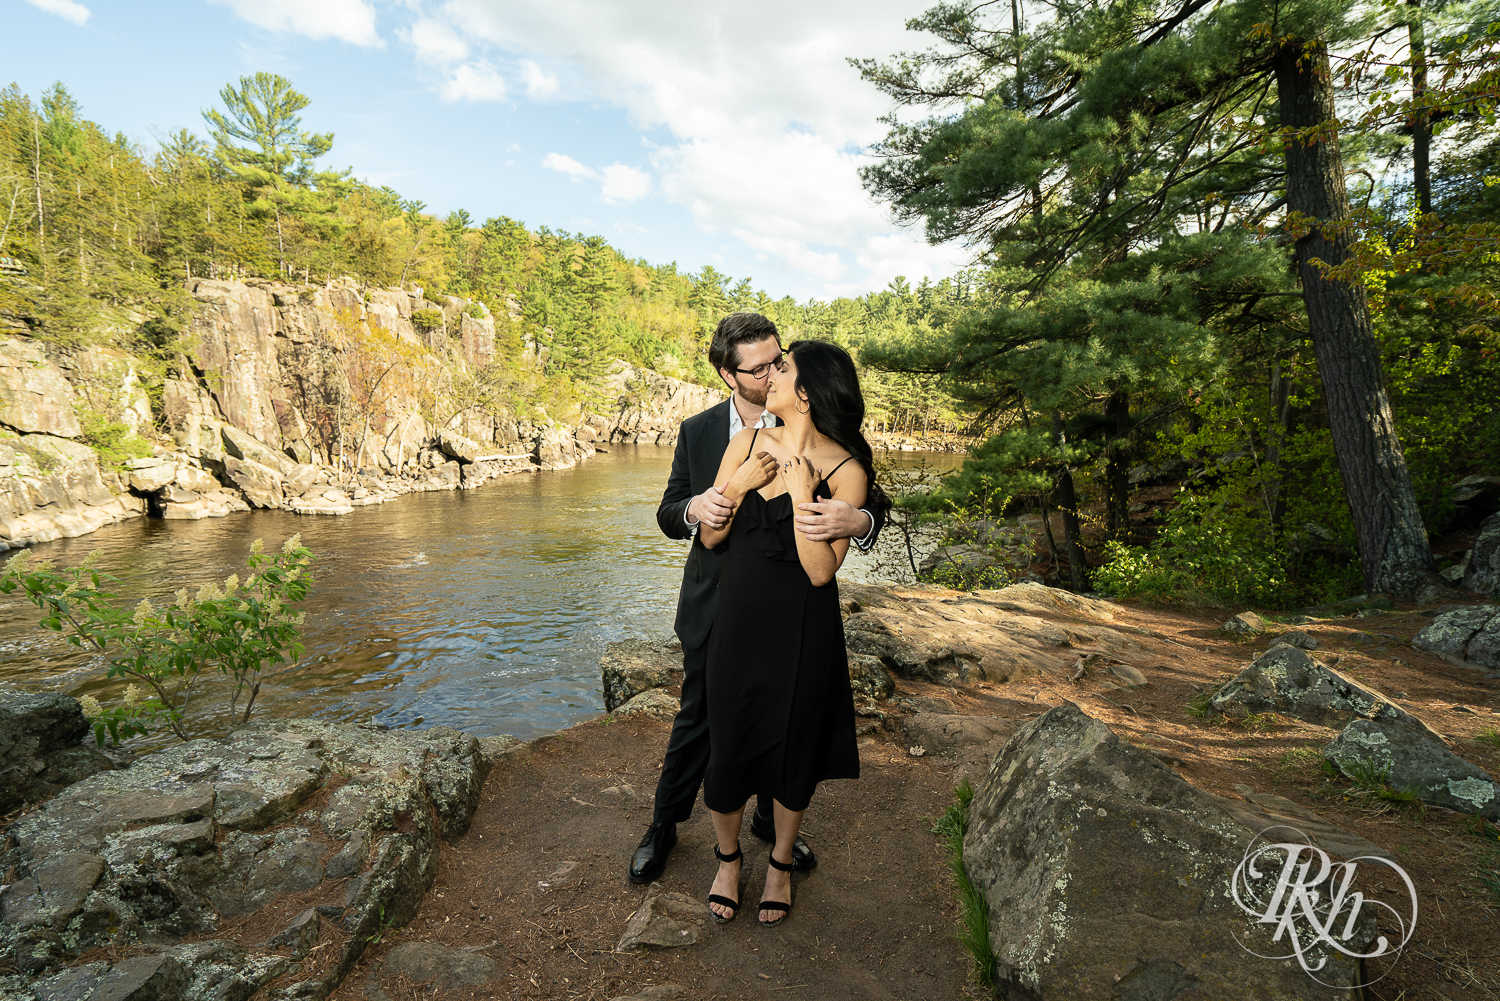 Man in suit and woman in long black dress dance on cliff at Interstate State Park in Taylor's Fall, Minnesota.